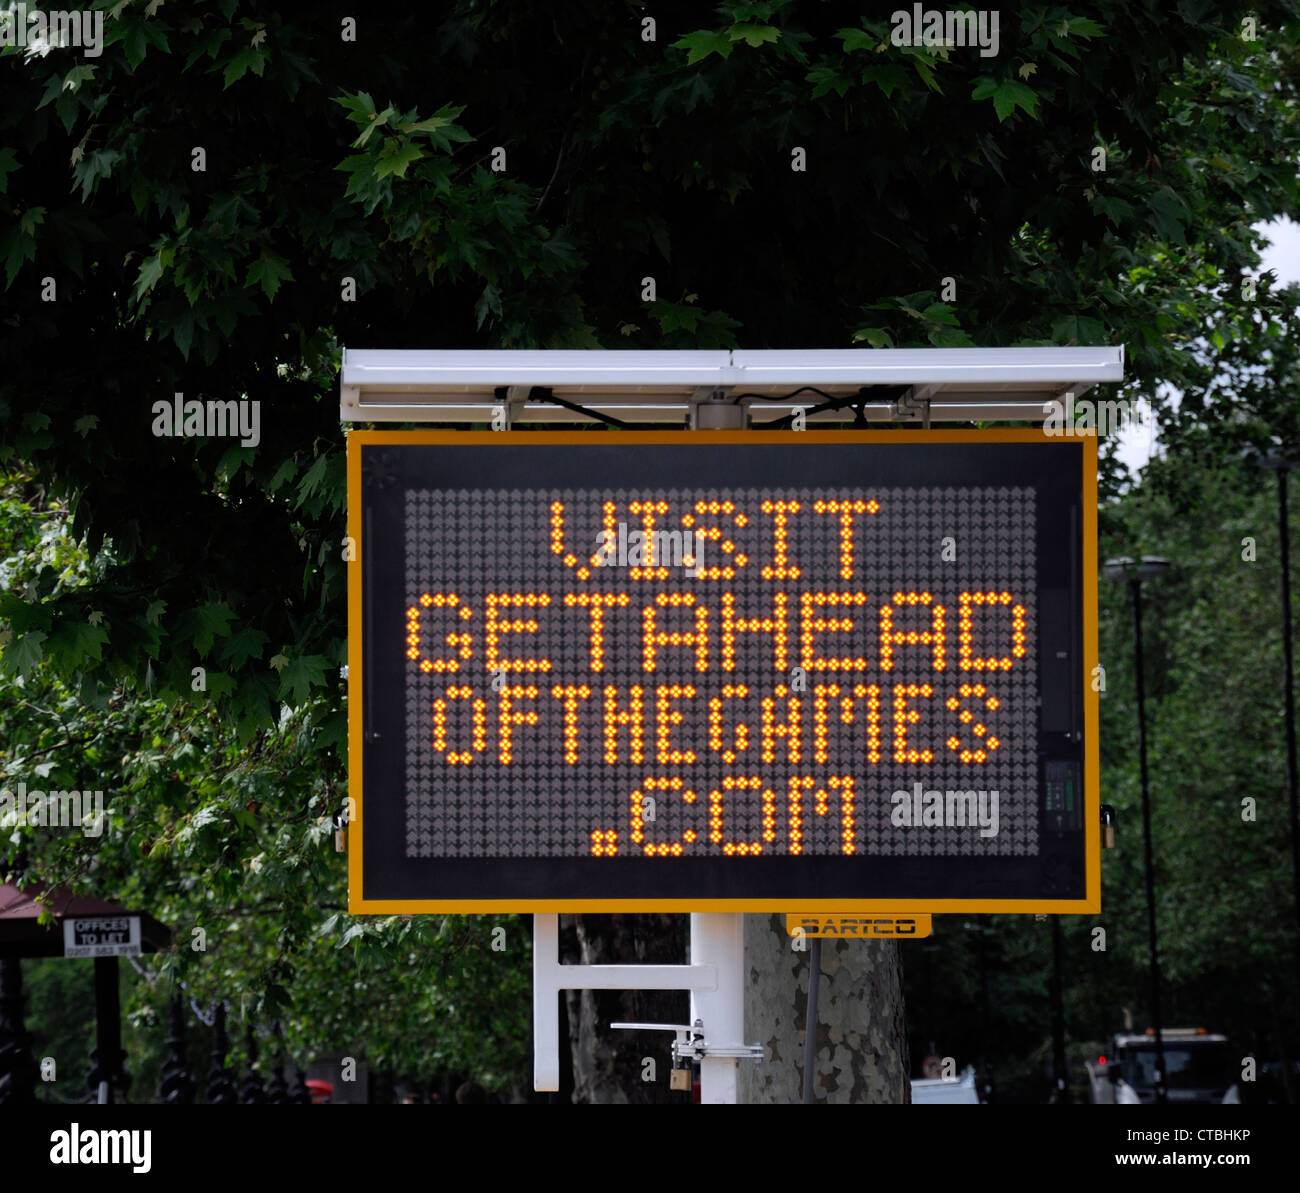 https://c8.alamy.com/comp/CTBHKP/traffic-for-london-tfl-led-road-sign-indicate-indicating-traffic-news-CTBHKP.jpg